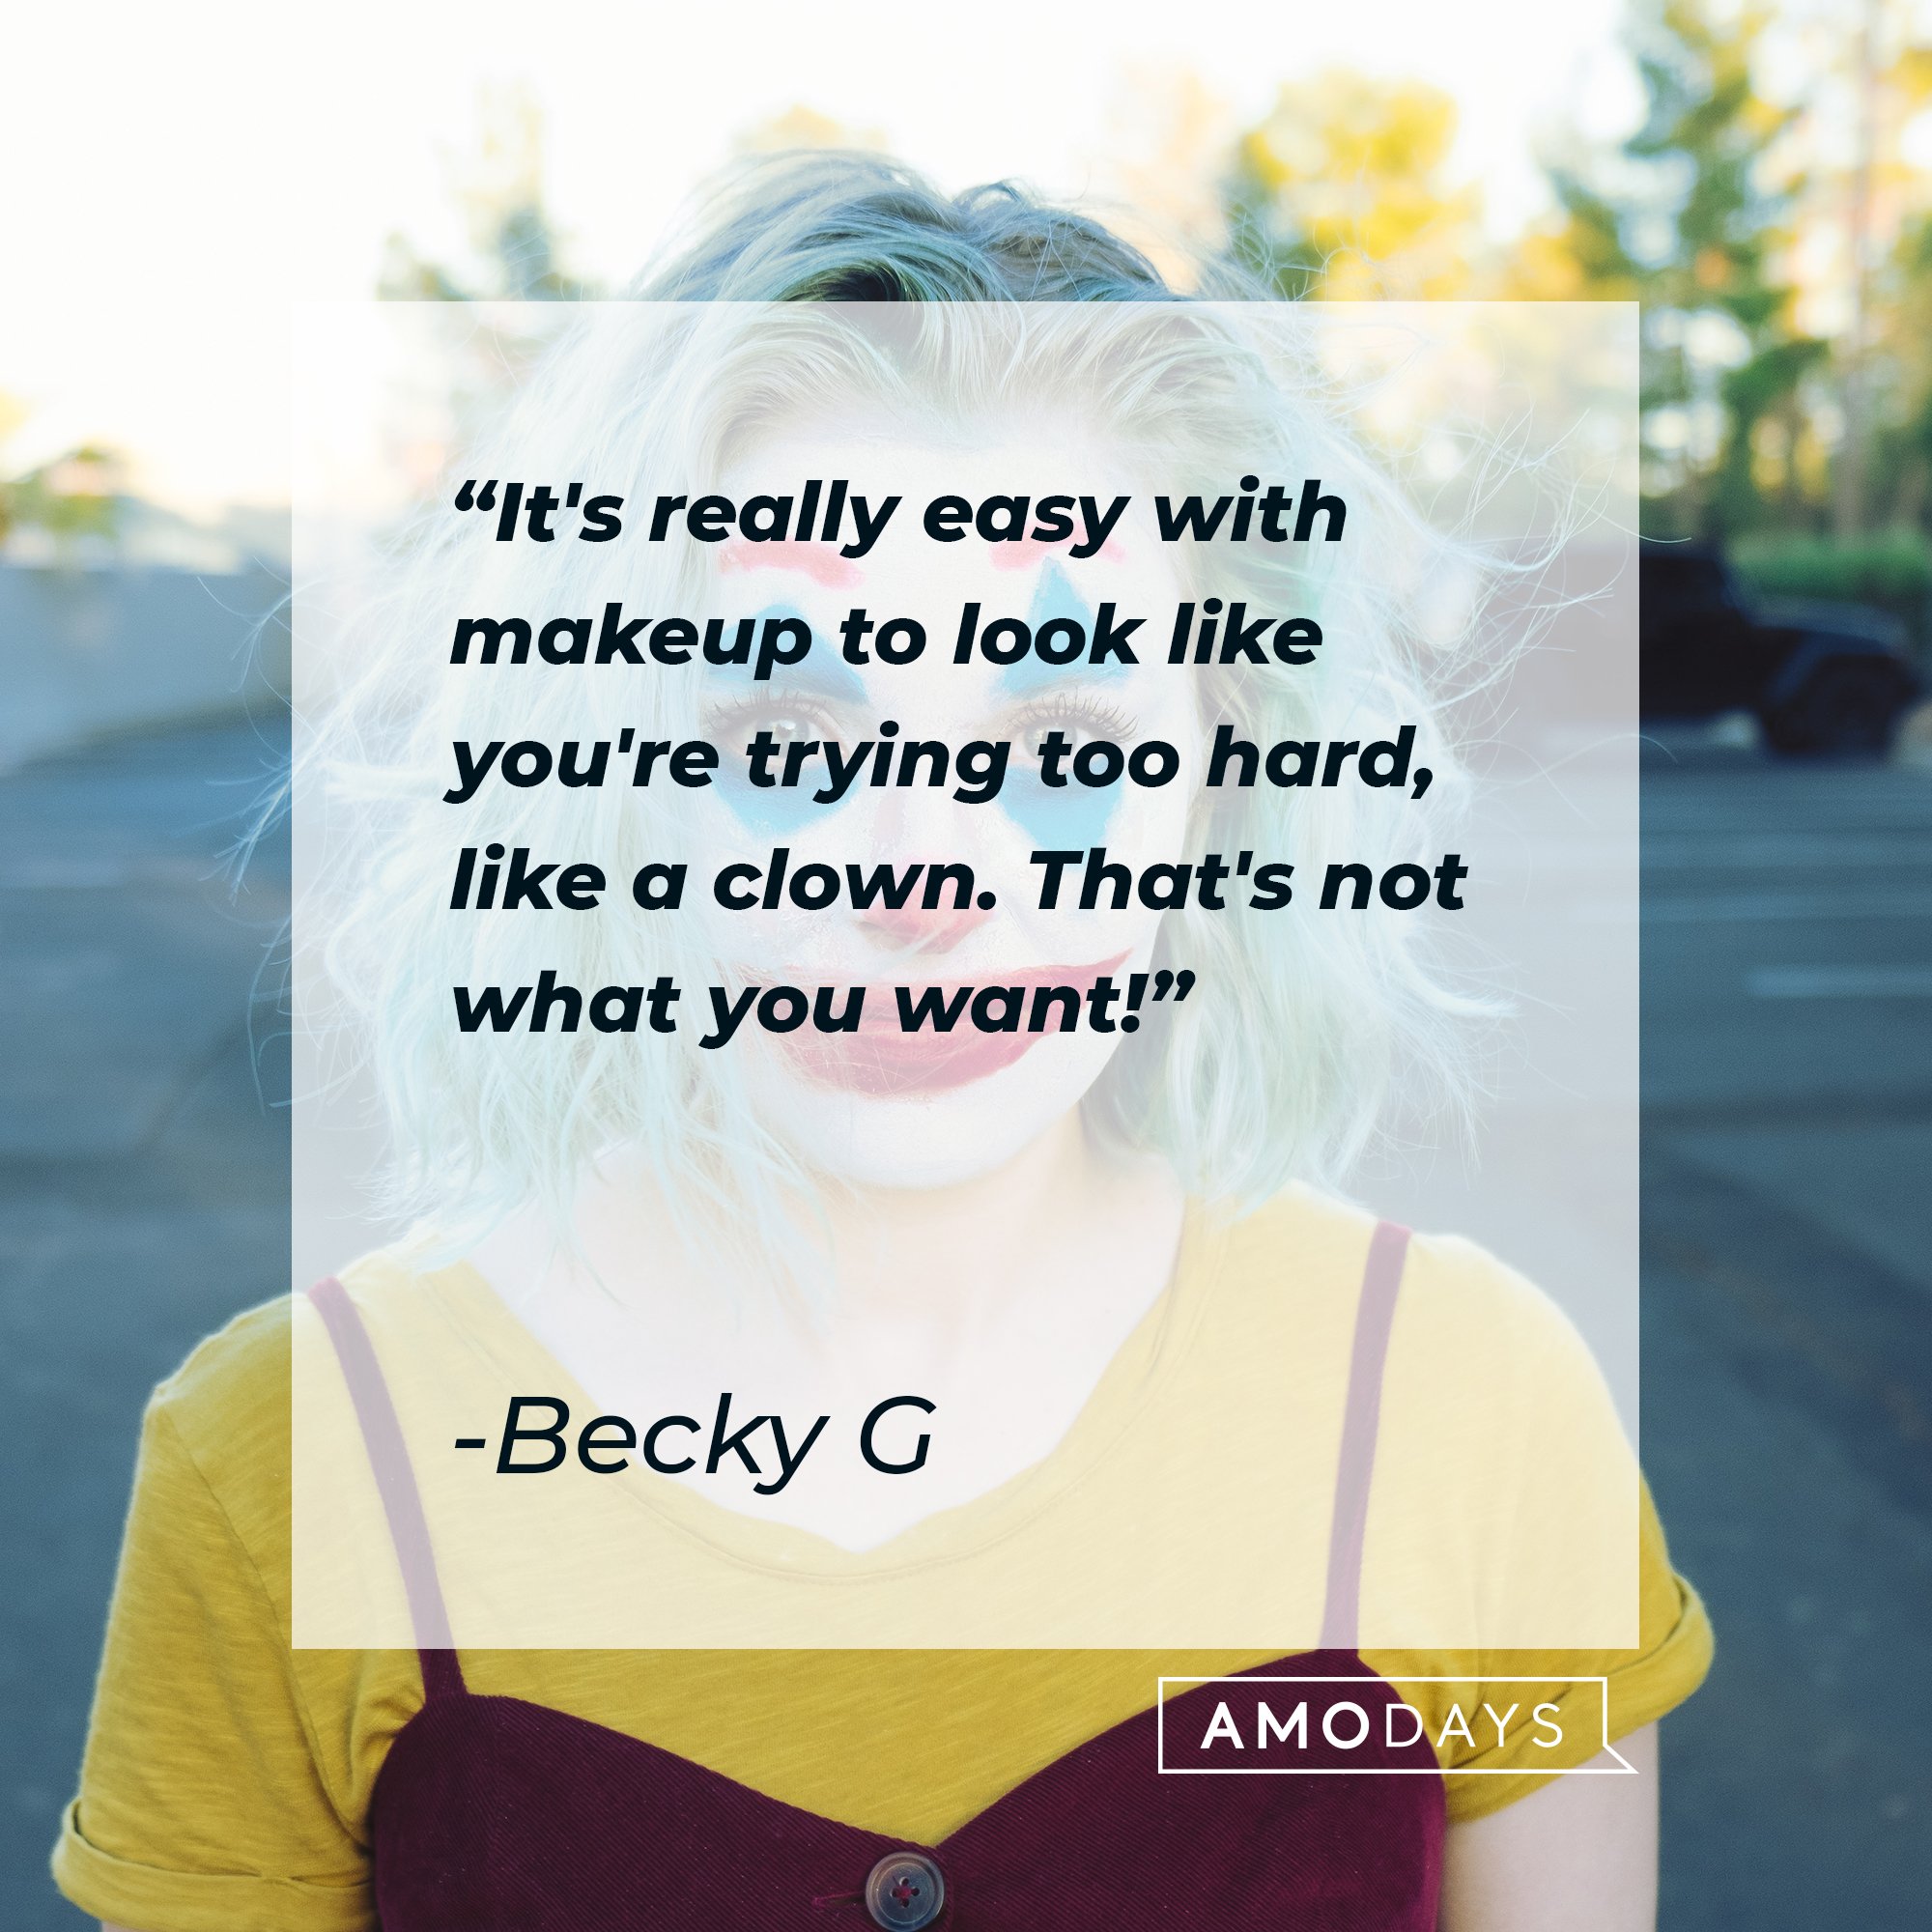  Becky G's quote "It's really easy with makeup to look like you're trying too hard, like a clown. That's not what you want!" | Source: Unsplash.com